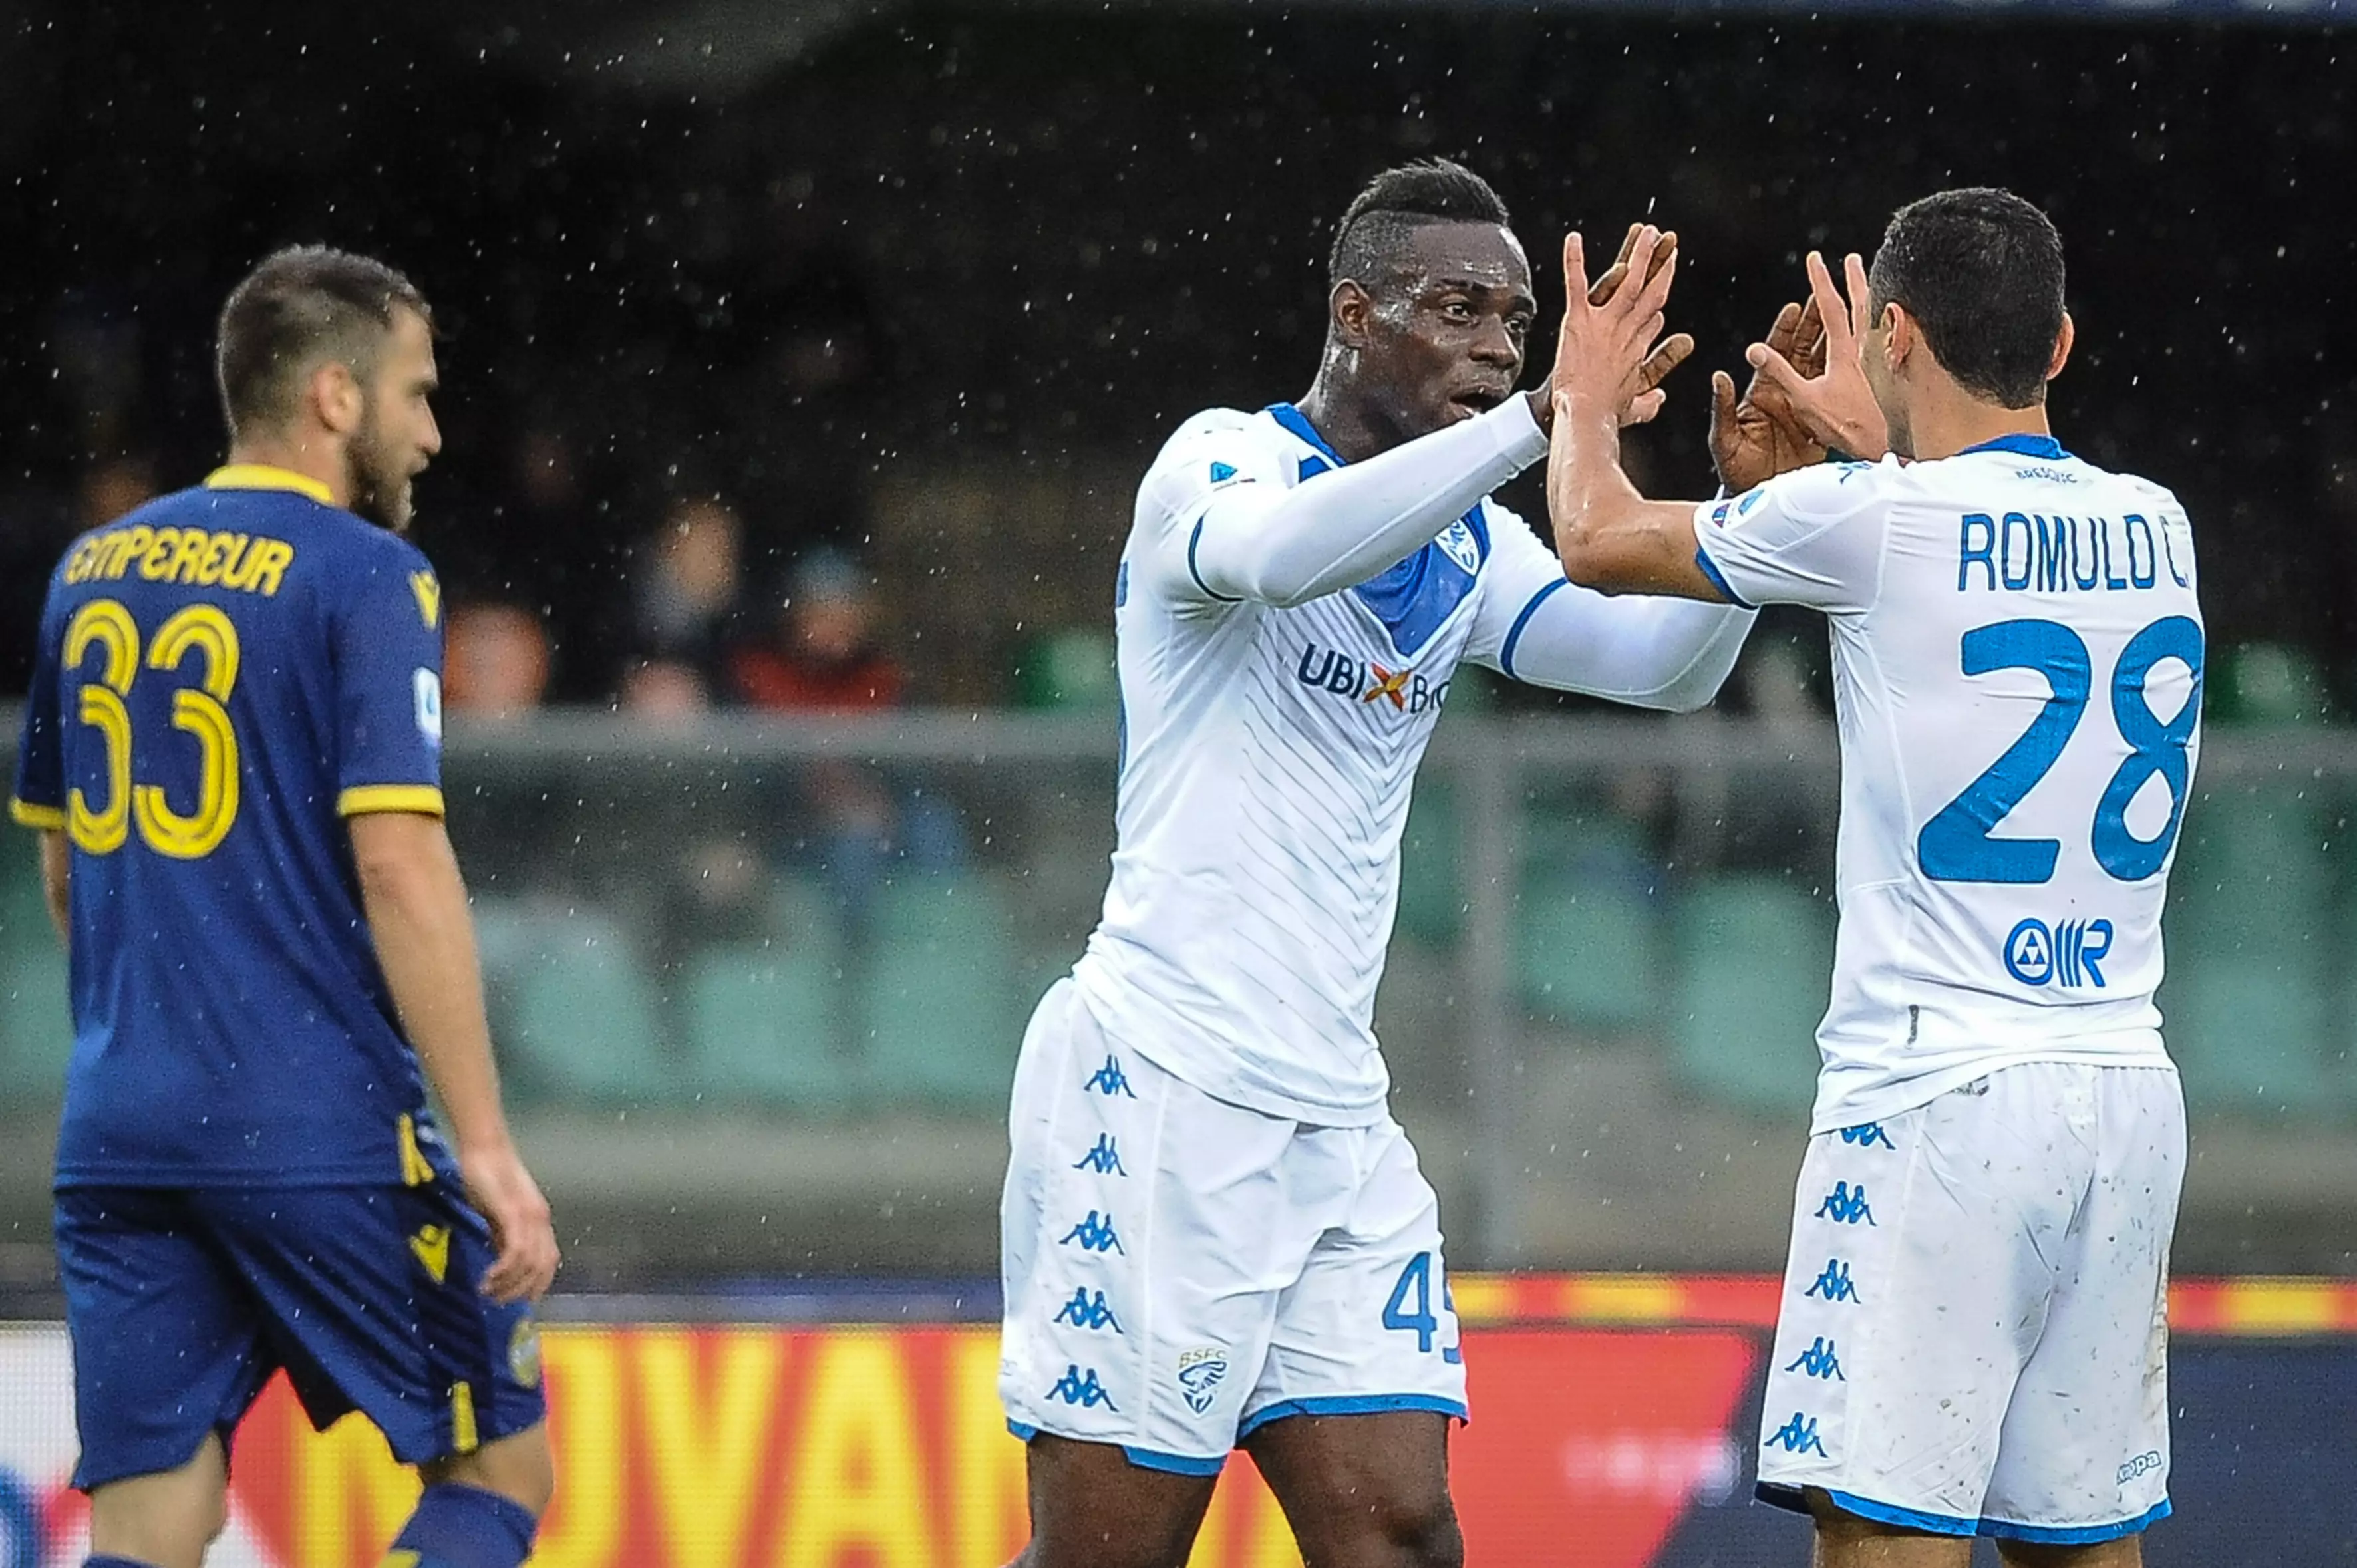 Balotelli did manage to temporarily silence the racists by scoring for Brescia. (Image